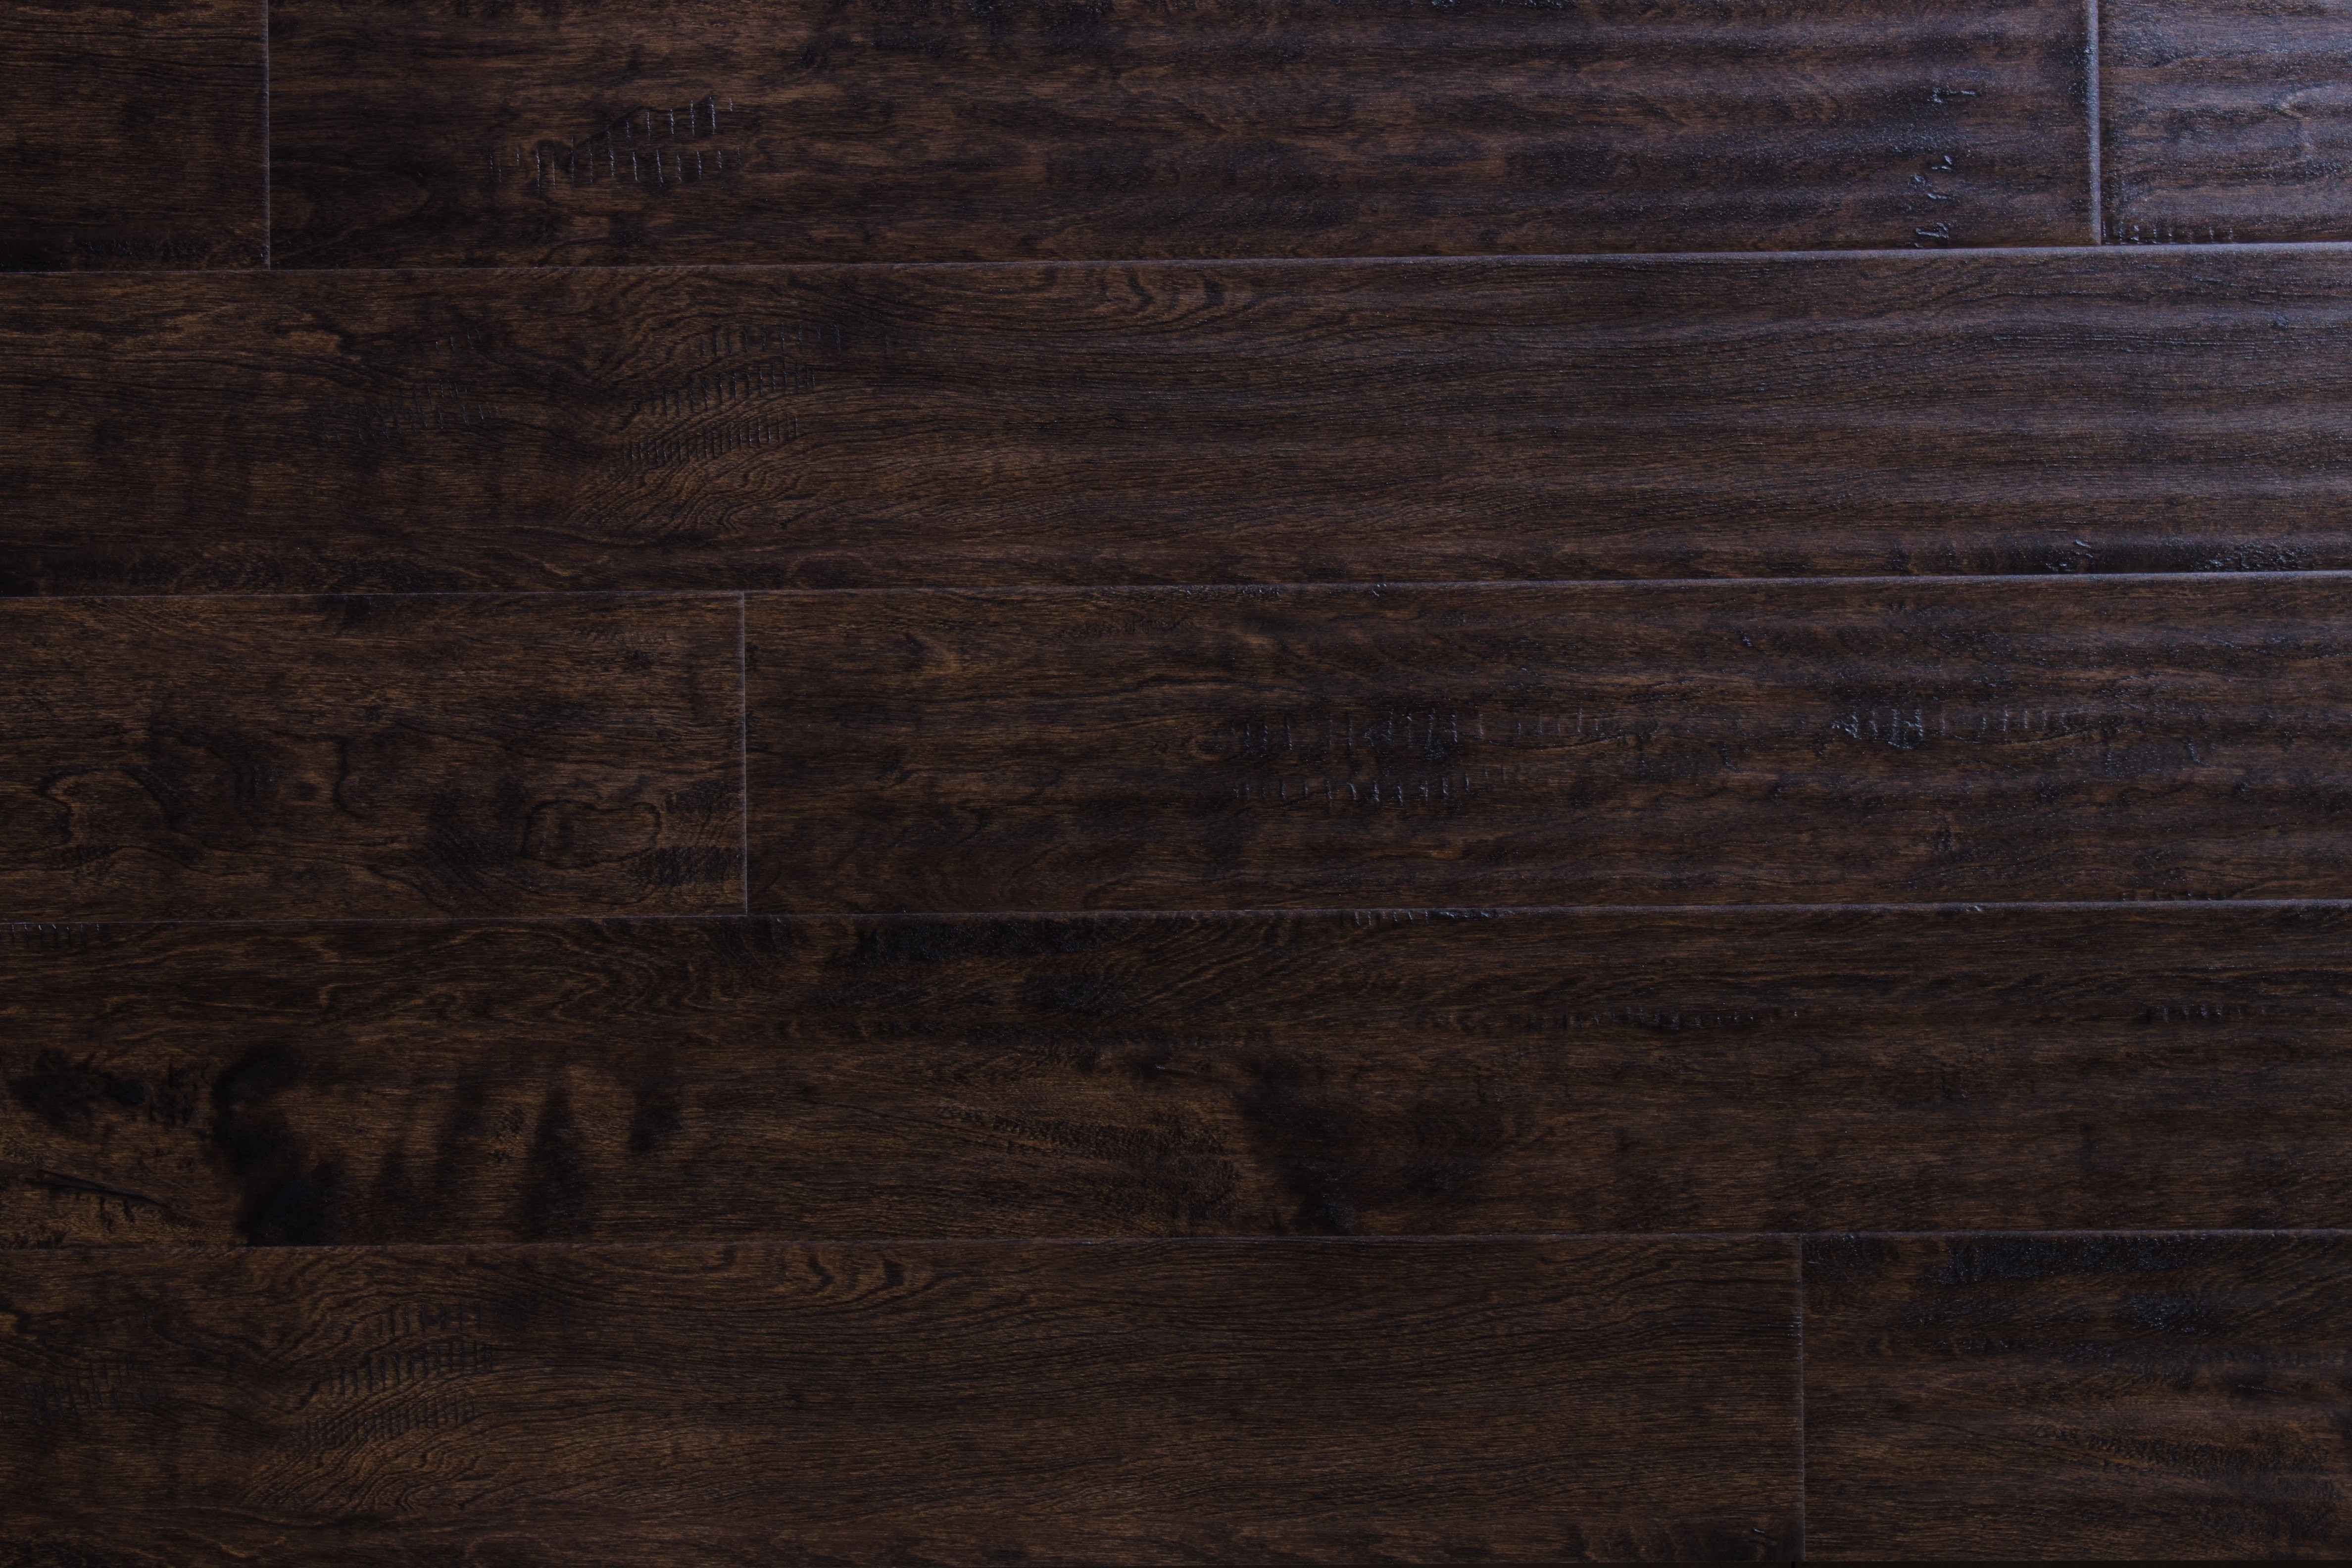 13 Wonderful Bruce Hand Scraped Hardwood Flooring 2024 free download bruce hand scraped hardwood flooring of wood flooring free samples available at builddirecta intended for tailor multi gb 5874277bb8d3c